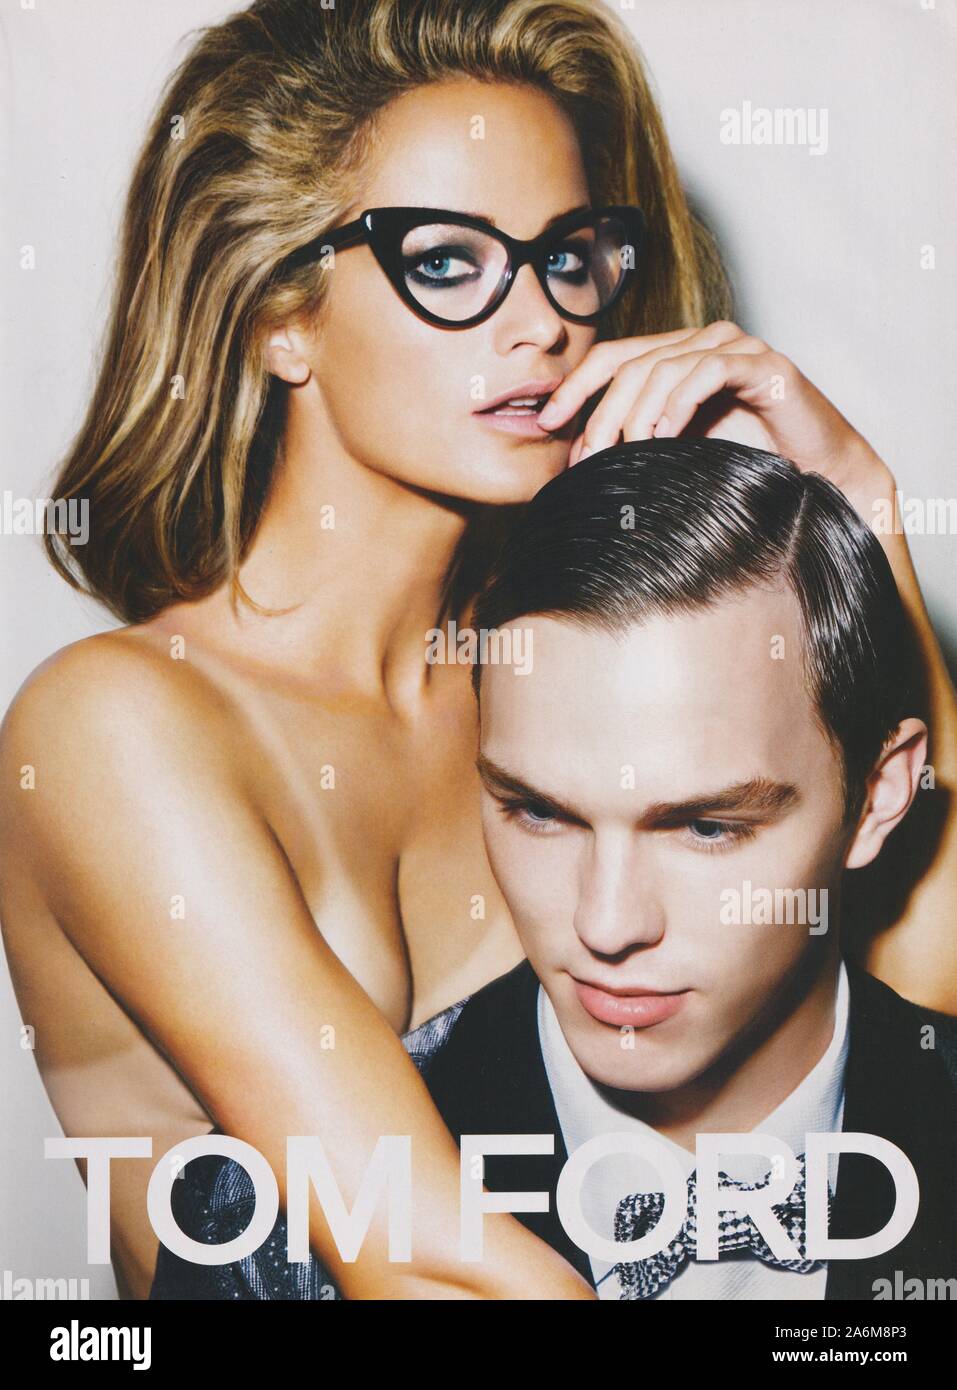 poster advertising Tom Ford house with Carolyn Murphy and Nicholas Hoult in paper magazine from 2010, Tom Ford advert Stock Photo - Alamy